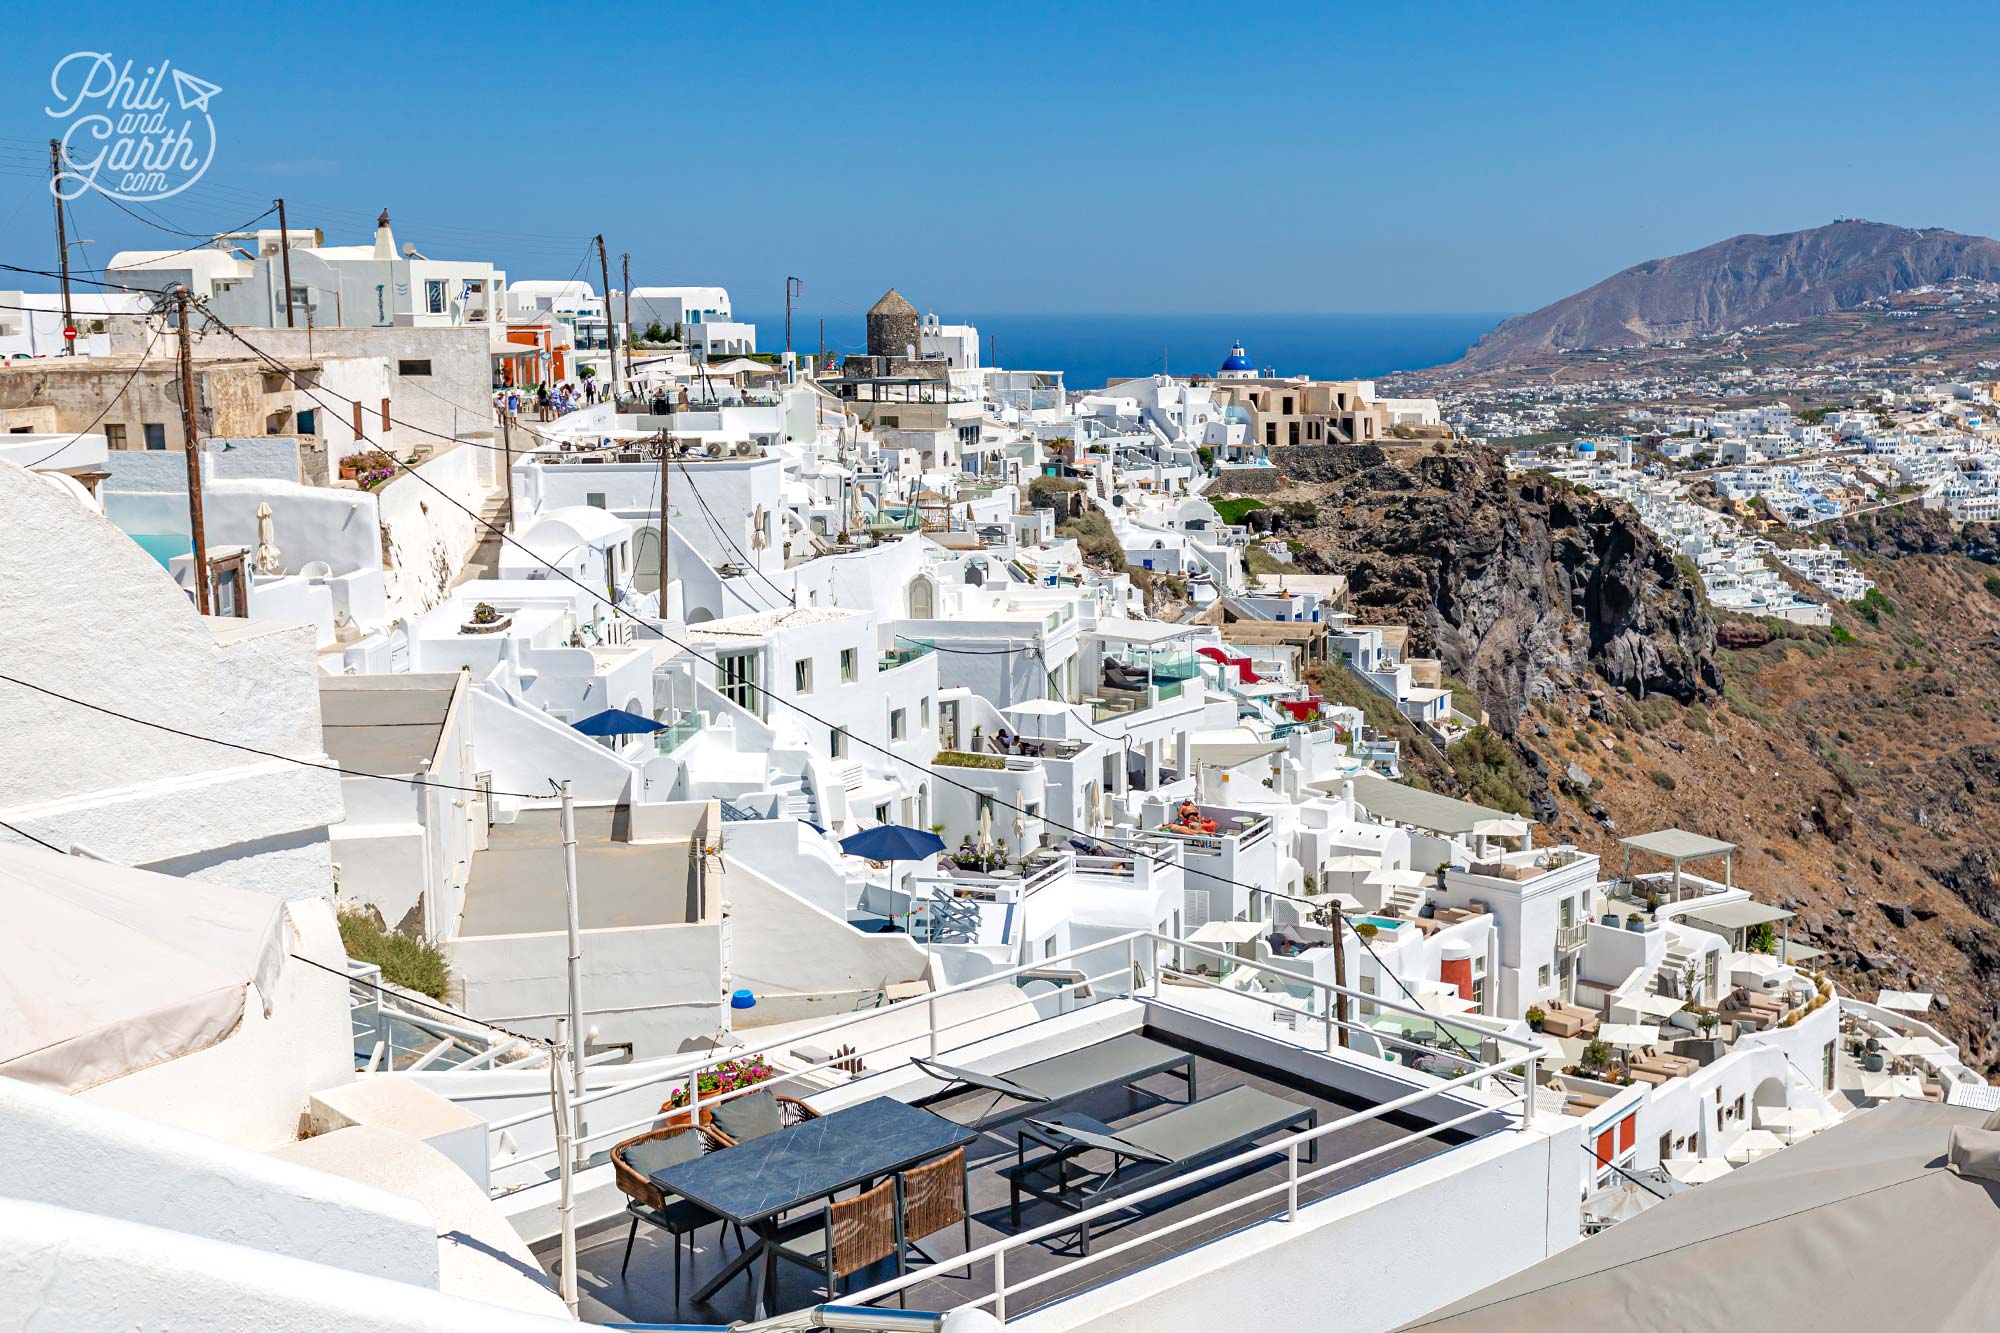 Santorini, Greece: picturesque cliffs, whitewashed buildings, and stunning sunsets over the Aegean Sea